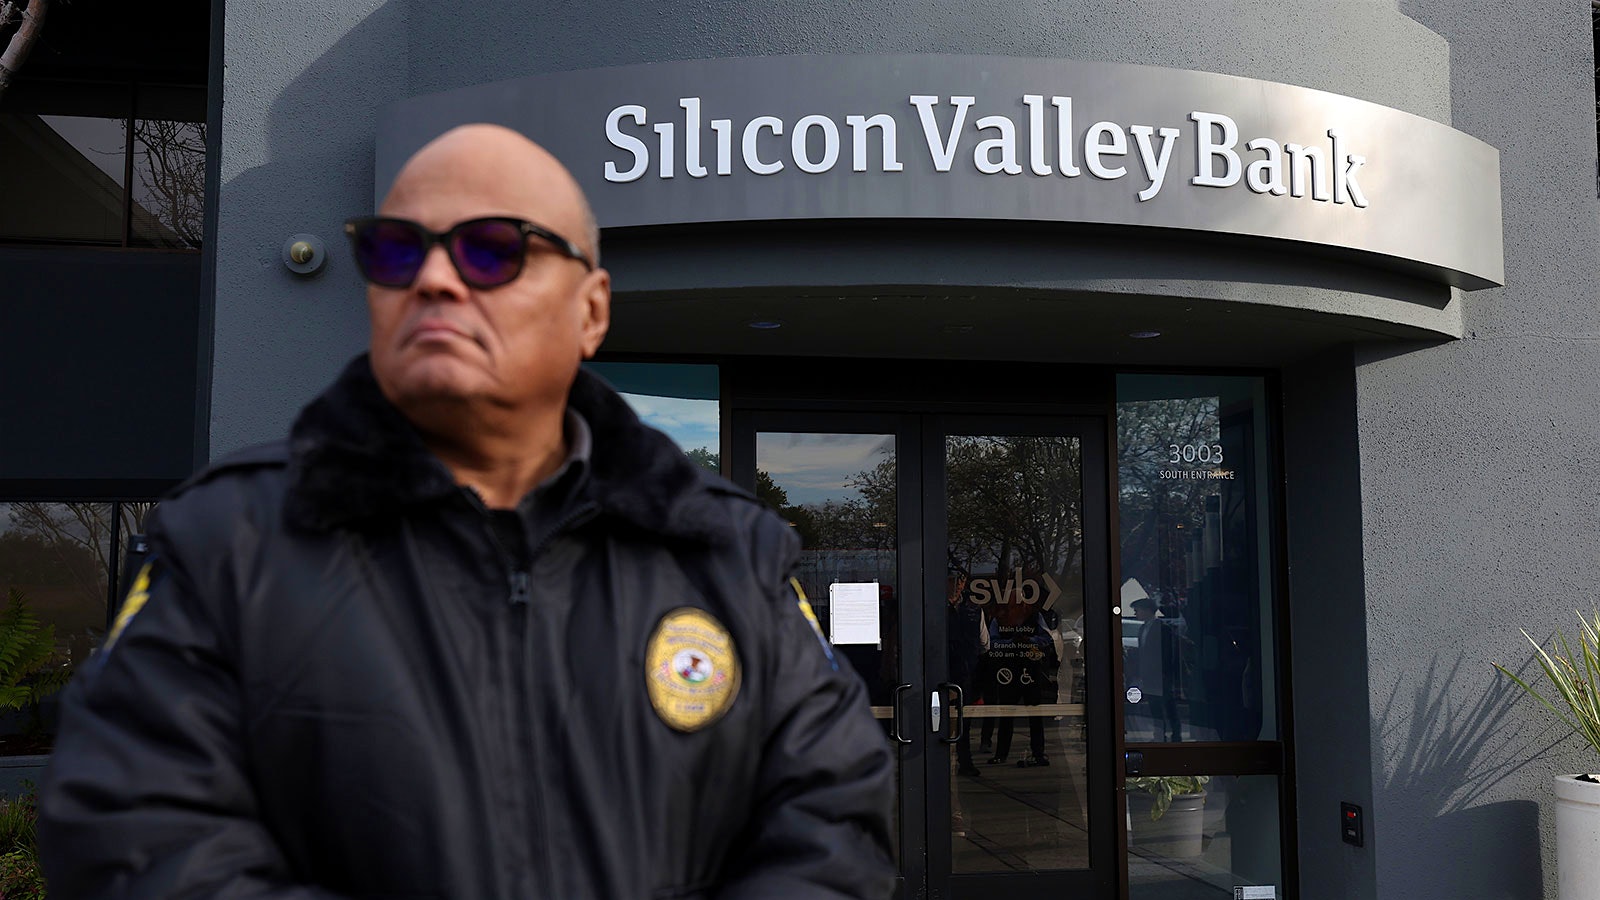  A guard stands watch outside Silicon Valley Bank's Santa Clara branch as customers are allowed to access their money.